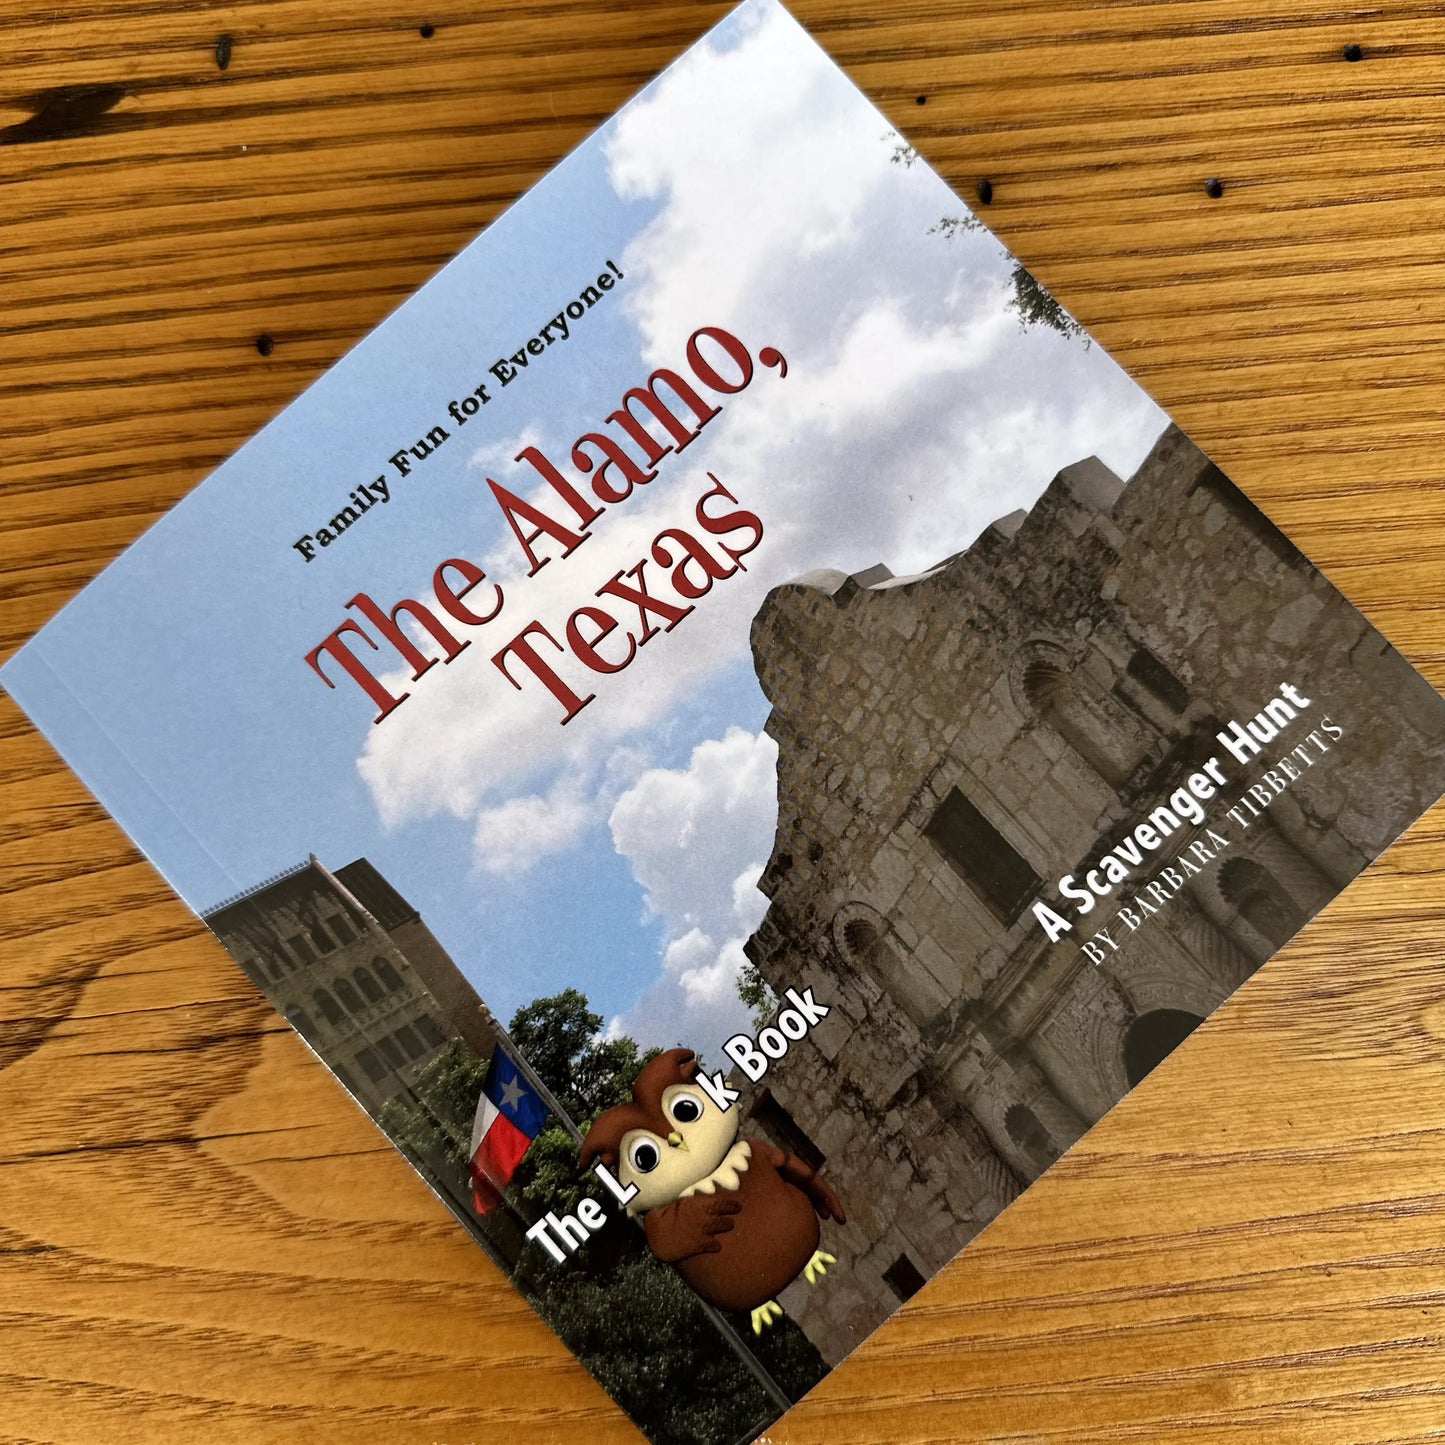 The LOOK Book "The Alamo, Texas: A Scavenger Hunt" by Barbara Tibbetts